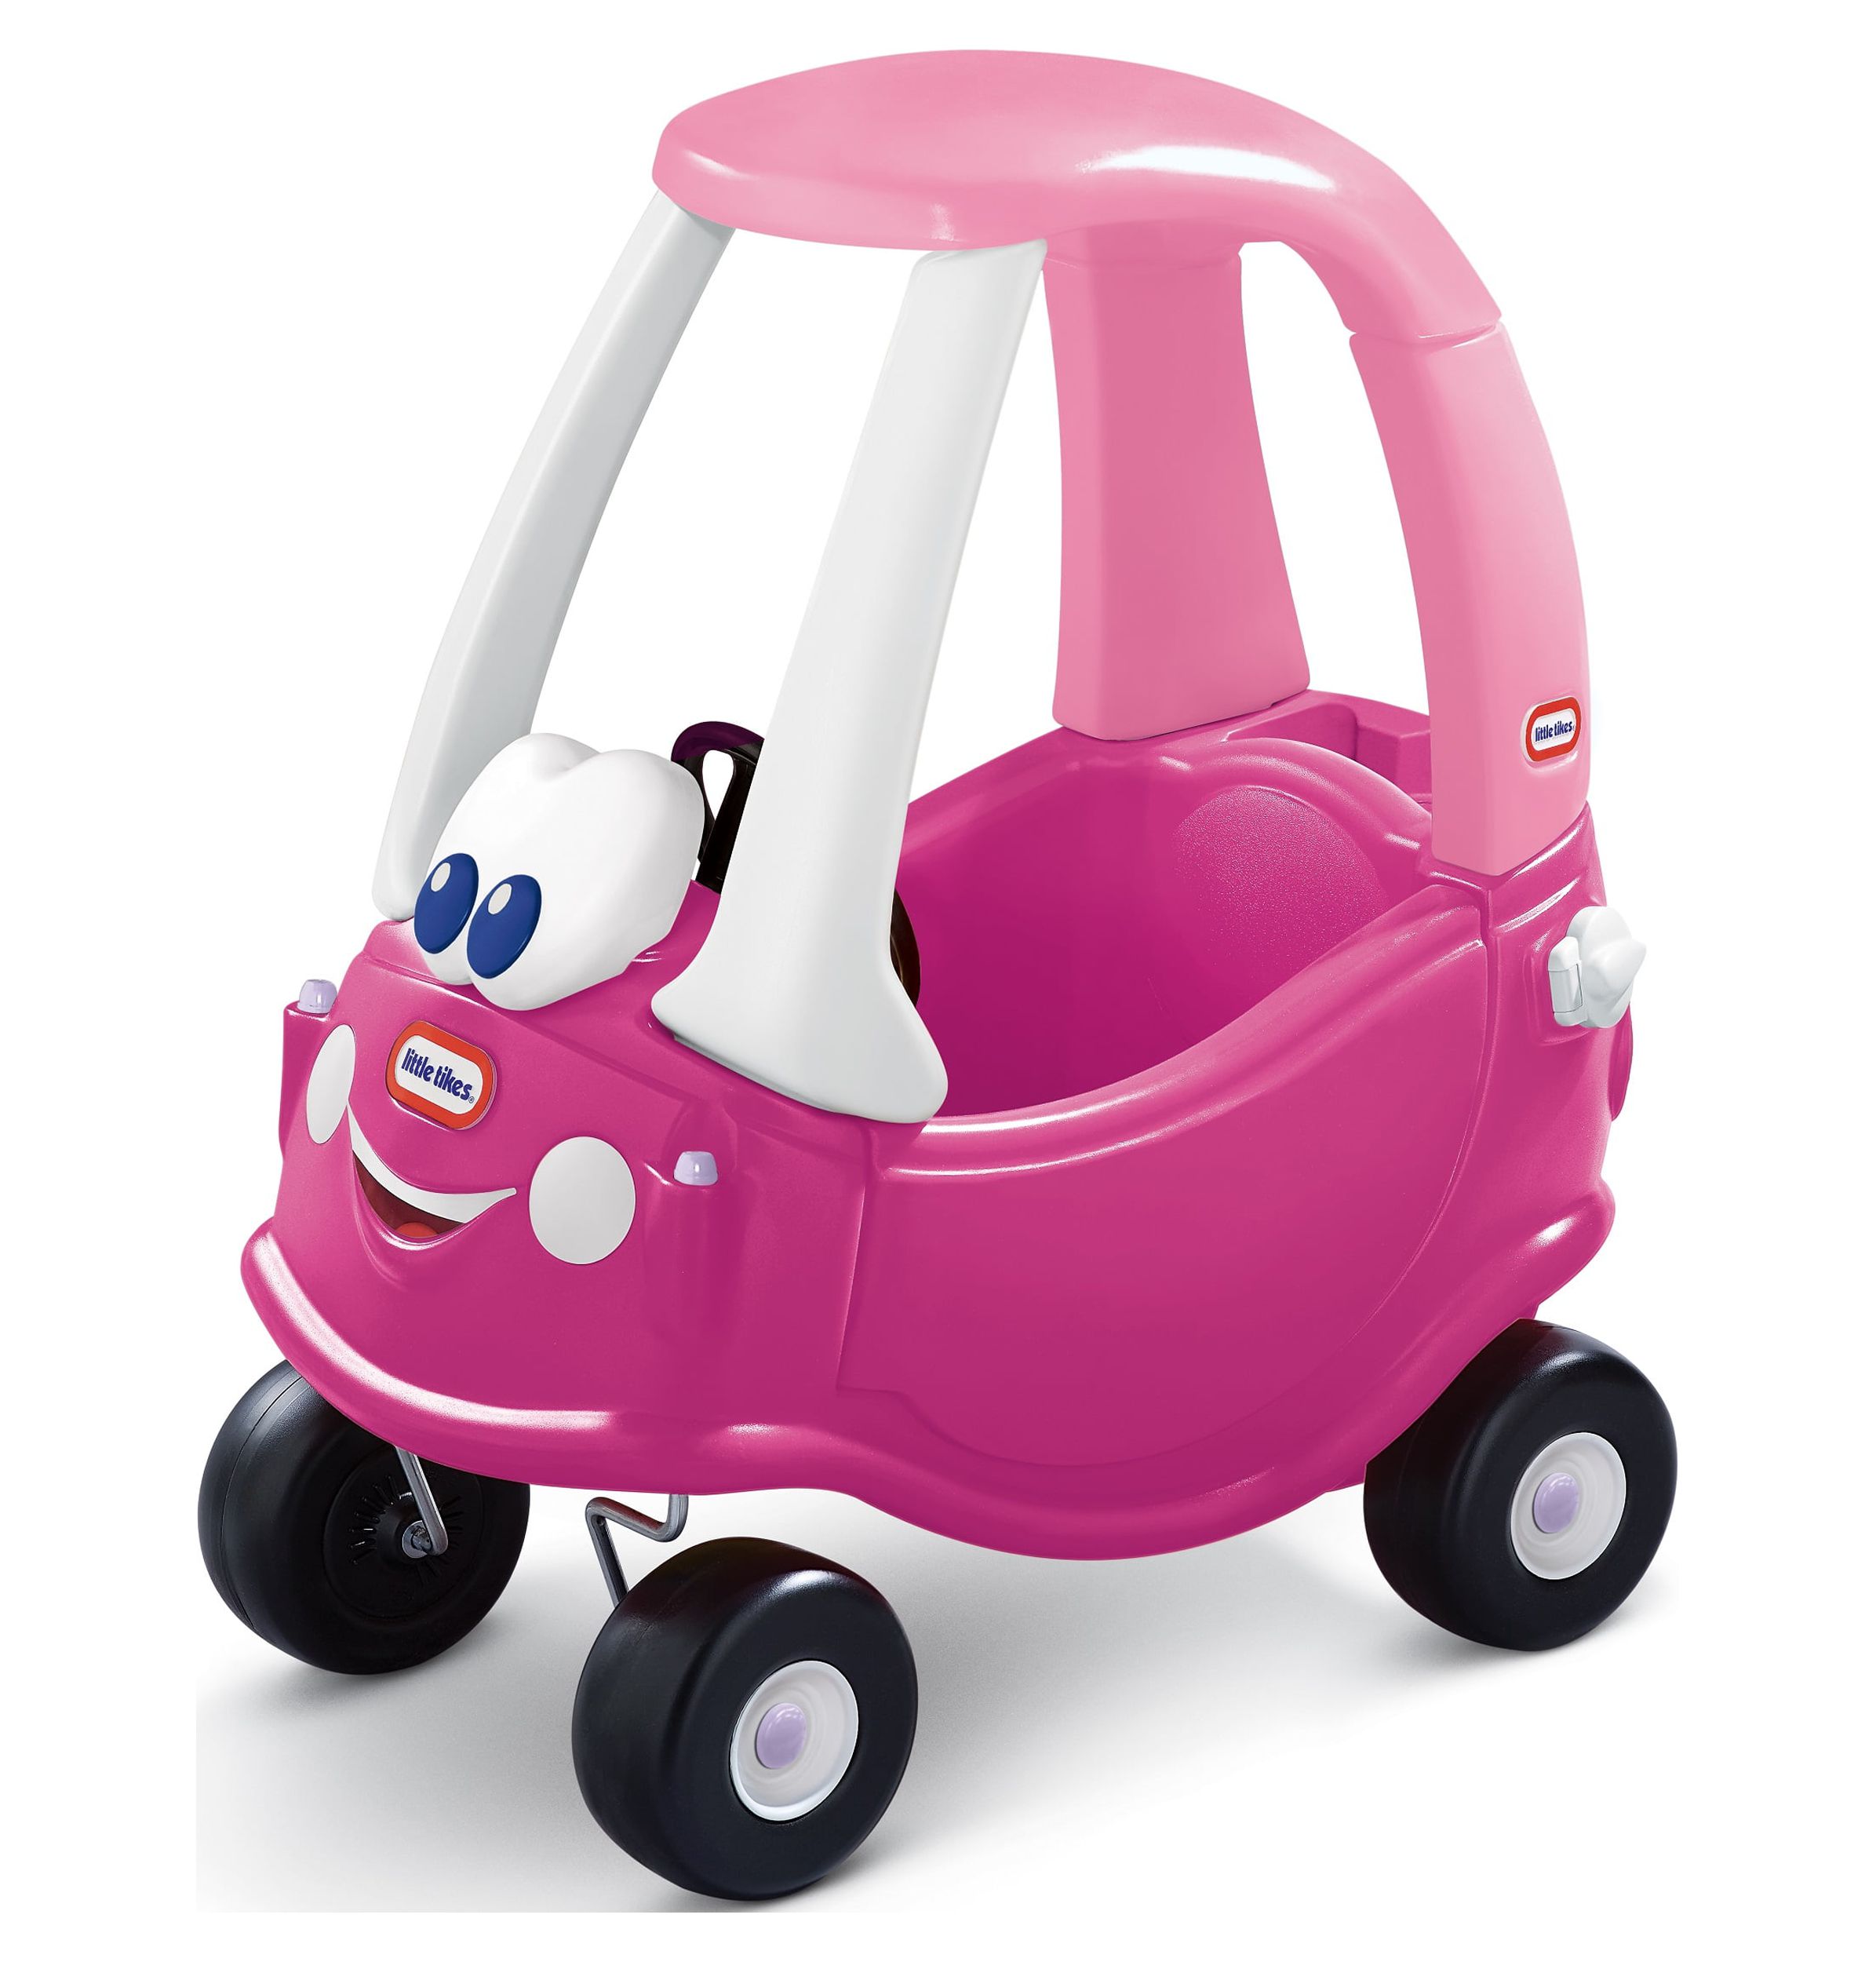 Little Tikes Princess Cozy Coupe (Magenta) For Girls and Boys Ages 1 Year + - image 1 of 10